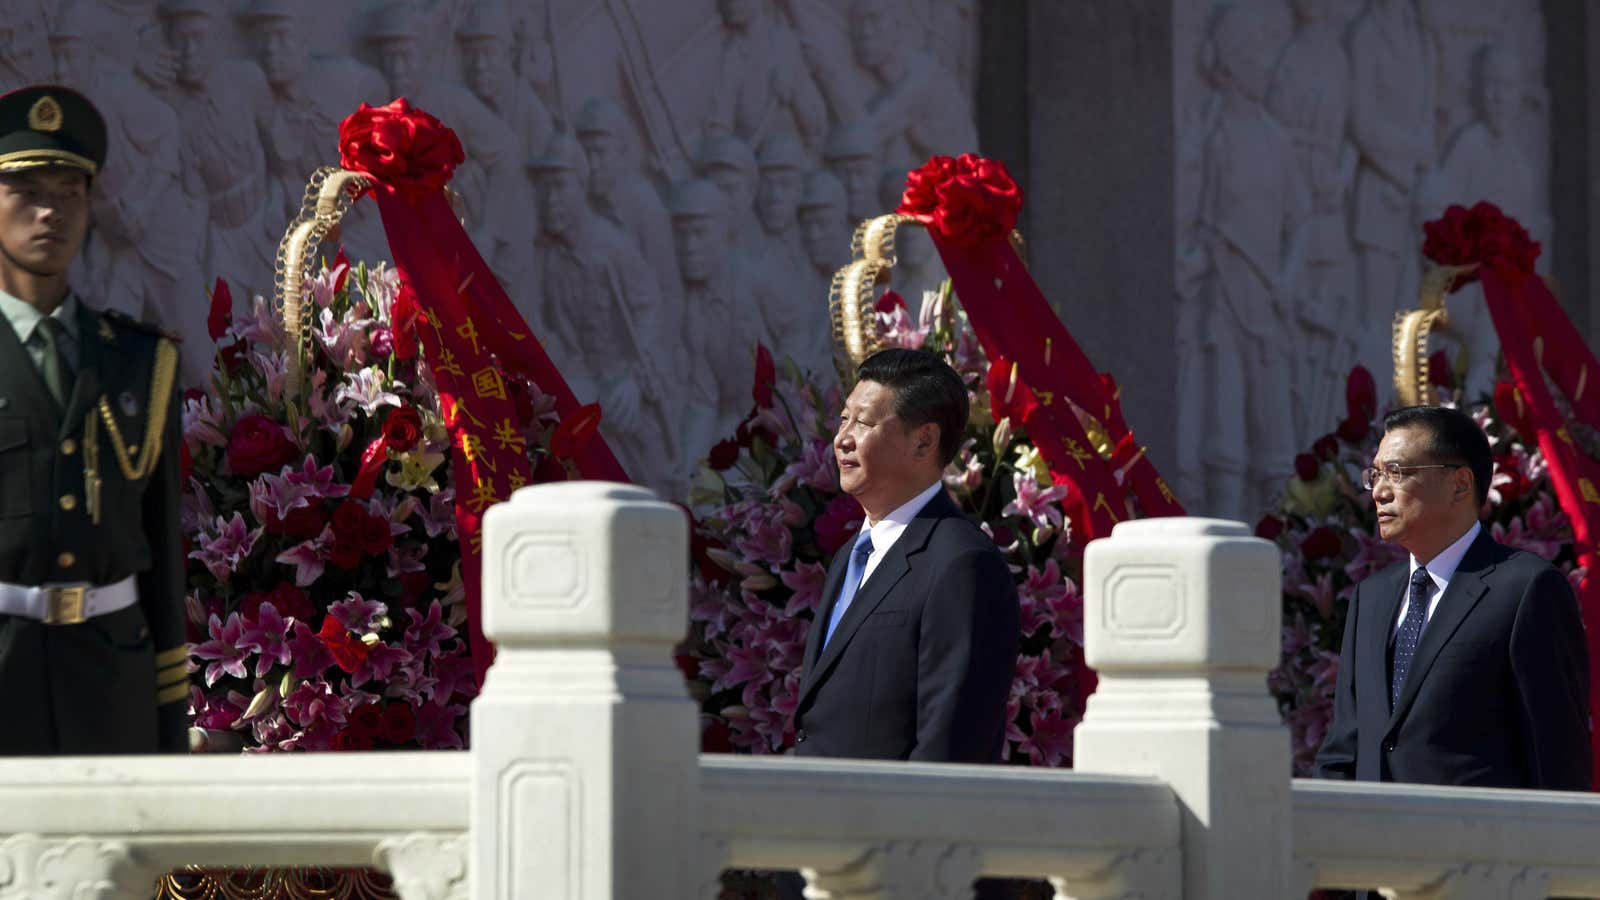 What we do know: Xi Jinping (center) and Li Keqiang (right) will become, respectively, the president and premier of China.